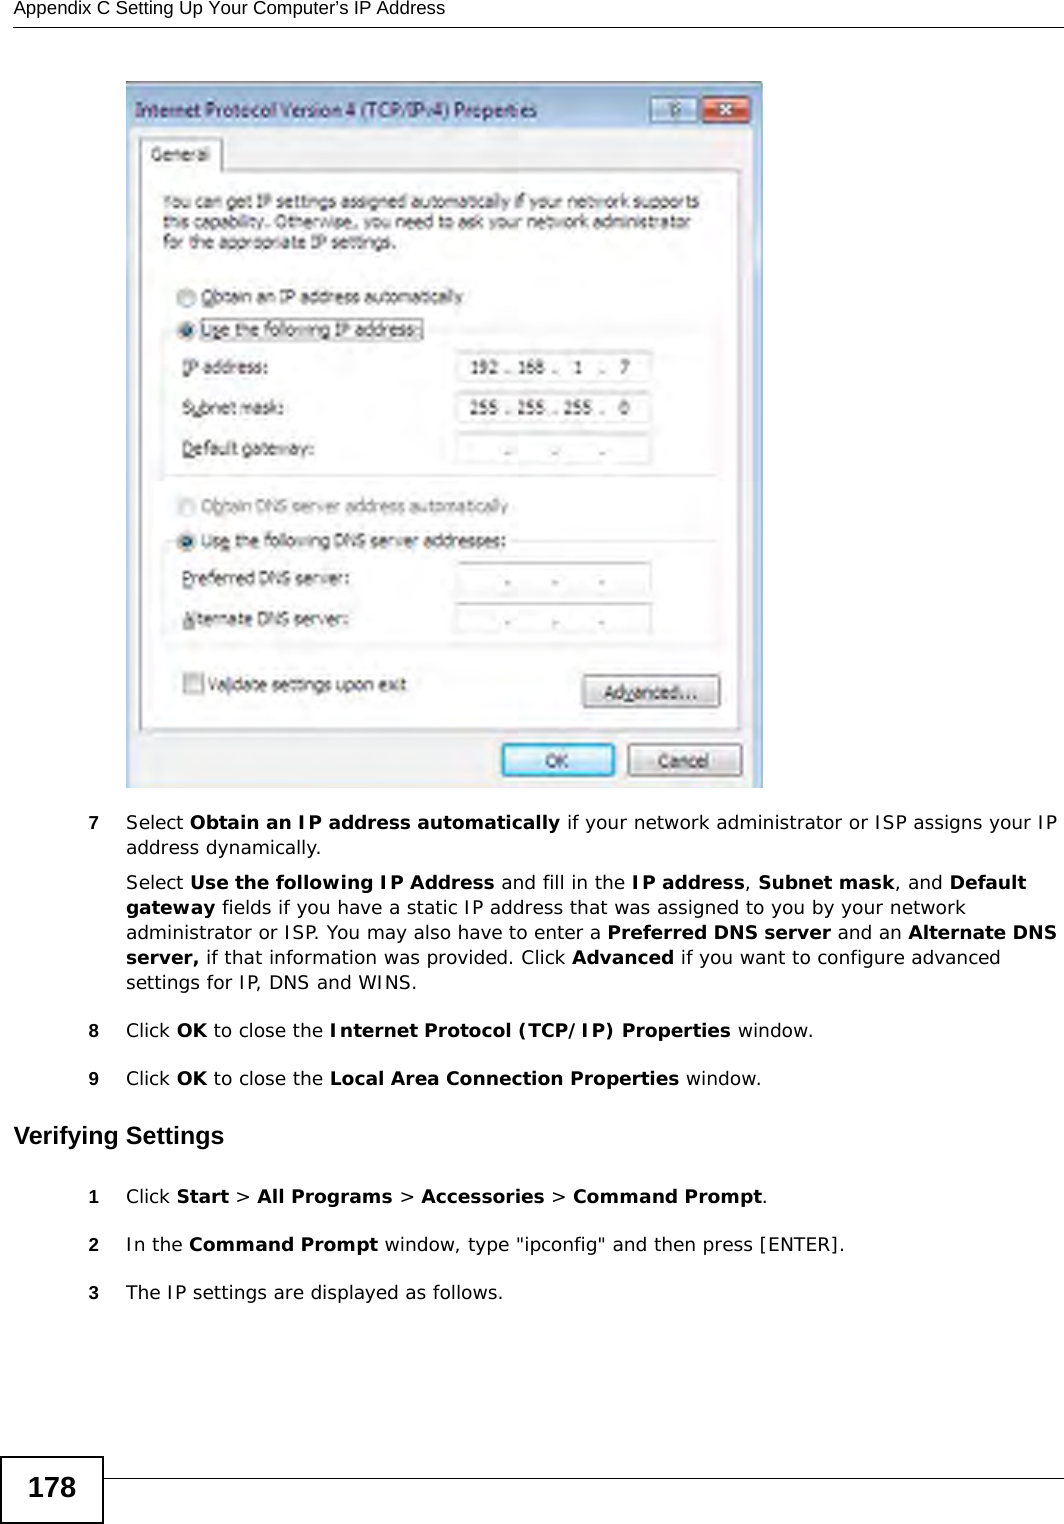 Appendix C Setting Up Your Computer’s IP Address1787Select Obtain an IP address automatically if your network administrator or ISP assigns your IP address dynamically.Select Use the following IP Address and fill in the IP address, Subnet mask, and Default gateway fields if you have a static IP address that was assigned to you by your network administrator or ISP. You may also have to enter a Preferred DNS server and an Alternate DNS server, if that information was provided. Click Advanced if you want to configure advanced settings for IP, DNS and WINS. 8Click OK to close the Internet Protocol (TCP/IP) Properties window.9Click OK to close the Local Area Connection Properties window.Verifying Settings1Click Start &gt; All Programs &gt; Accessories &gt; Command Prompt.2In the Command Prompt window, type &quot;ipconfig&quot; and then press [ENTER]. 3The IP settings are displayed as follows.